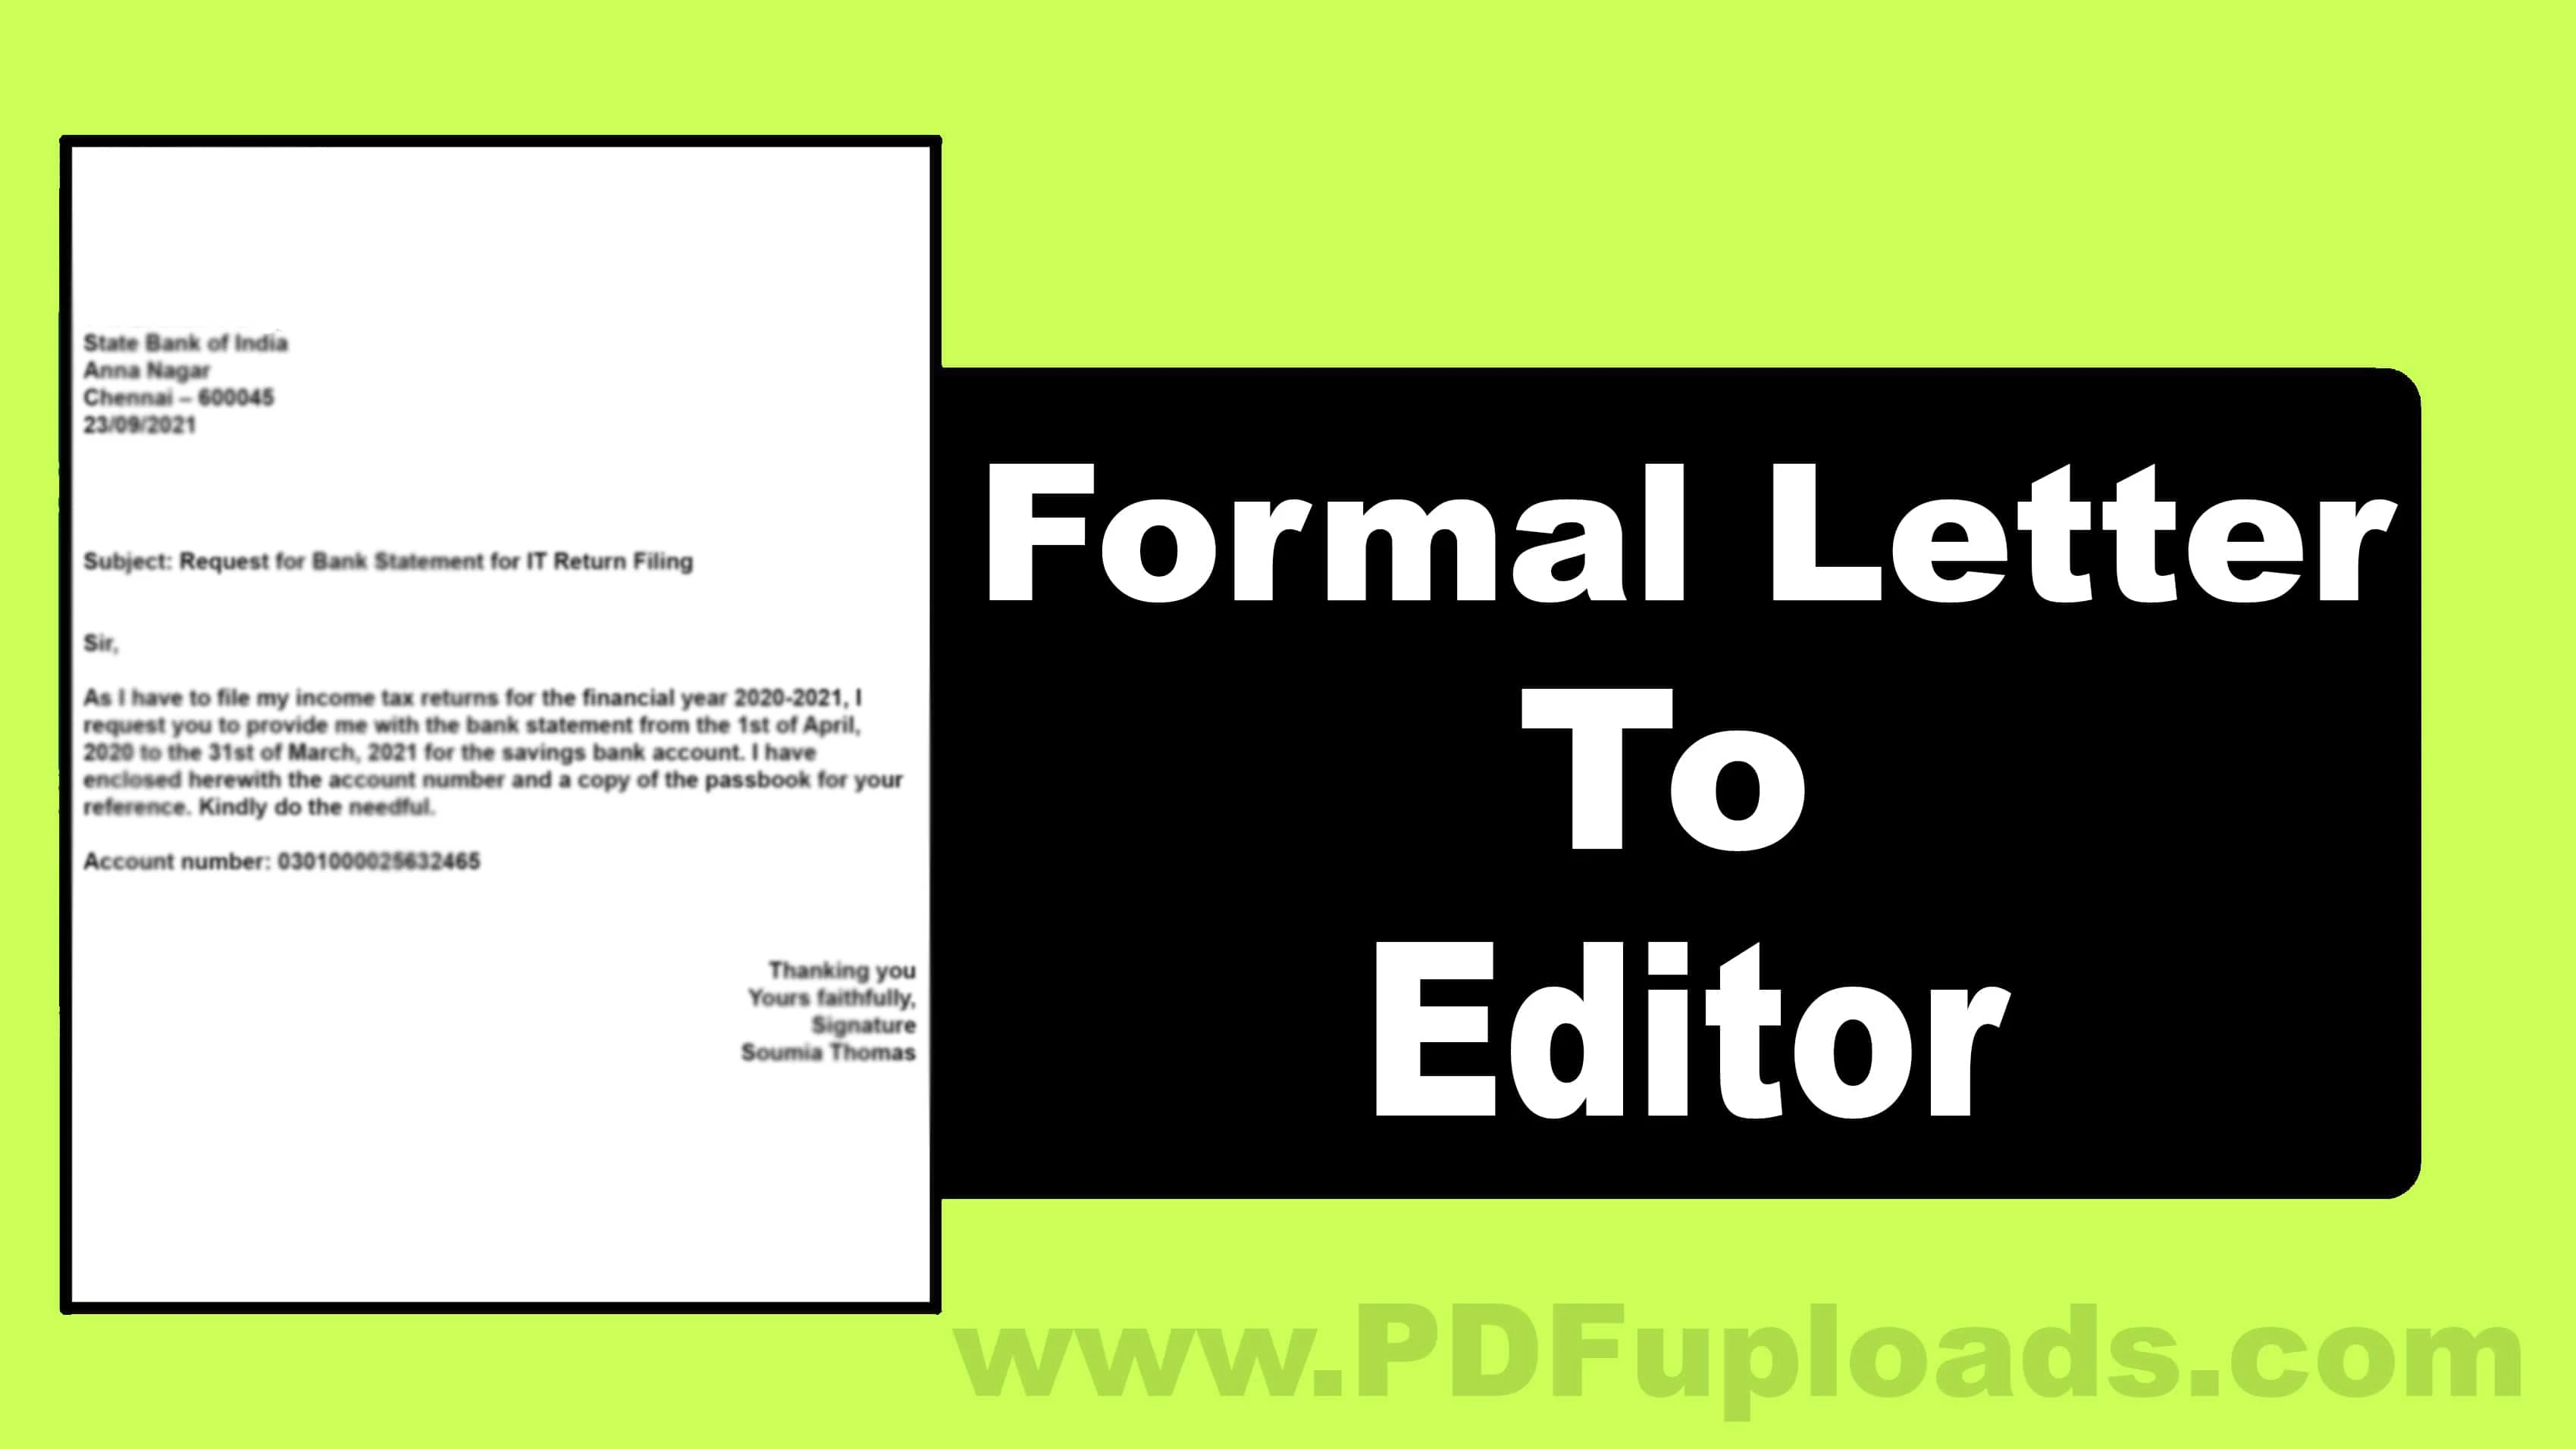 How to write Formal Letter to Editor - Format and samples